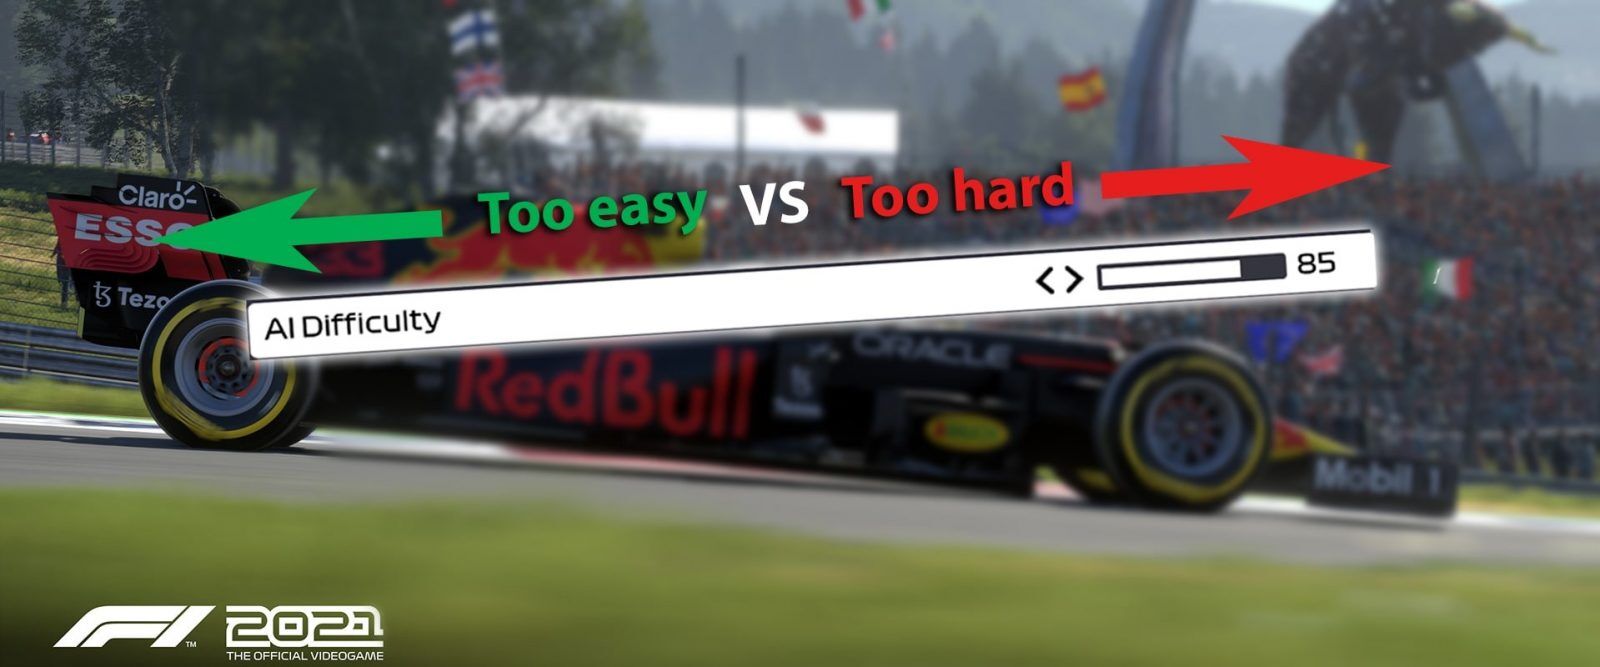 How to find the best AI difficulty level in F1 2021